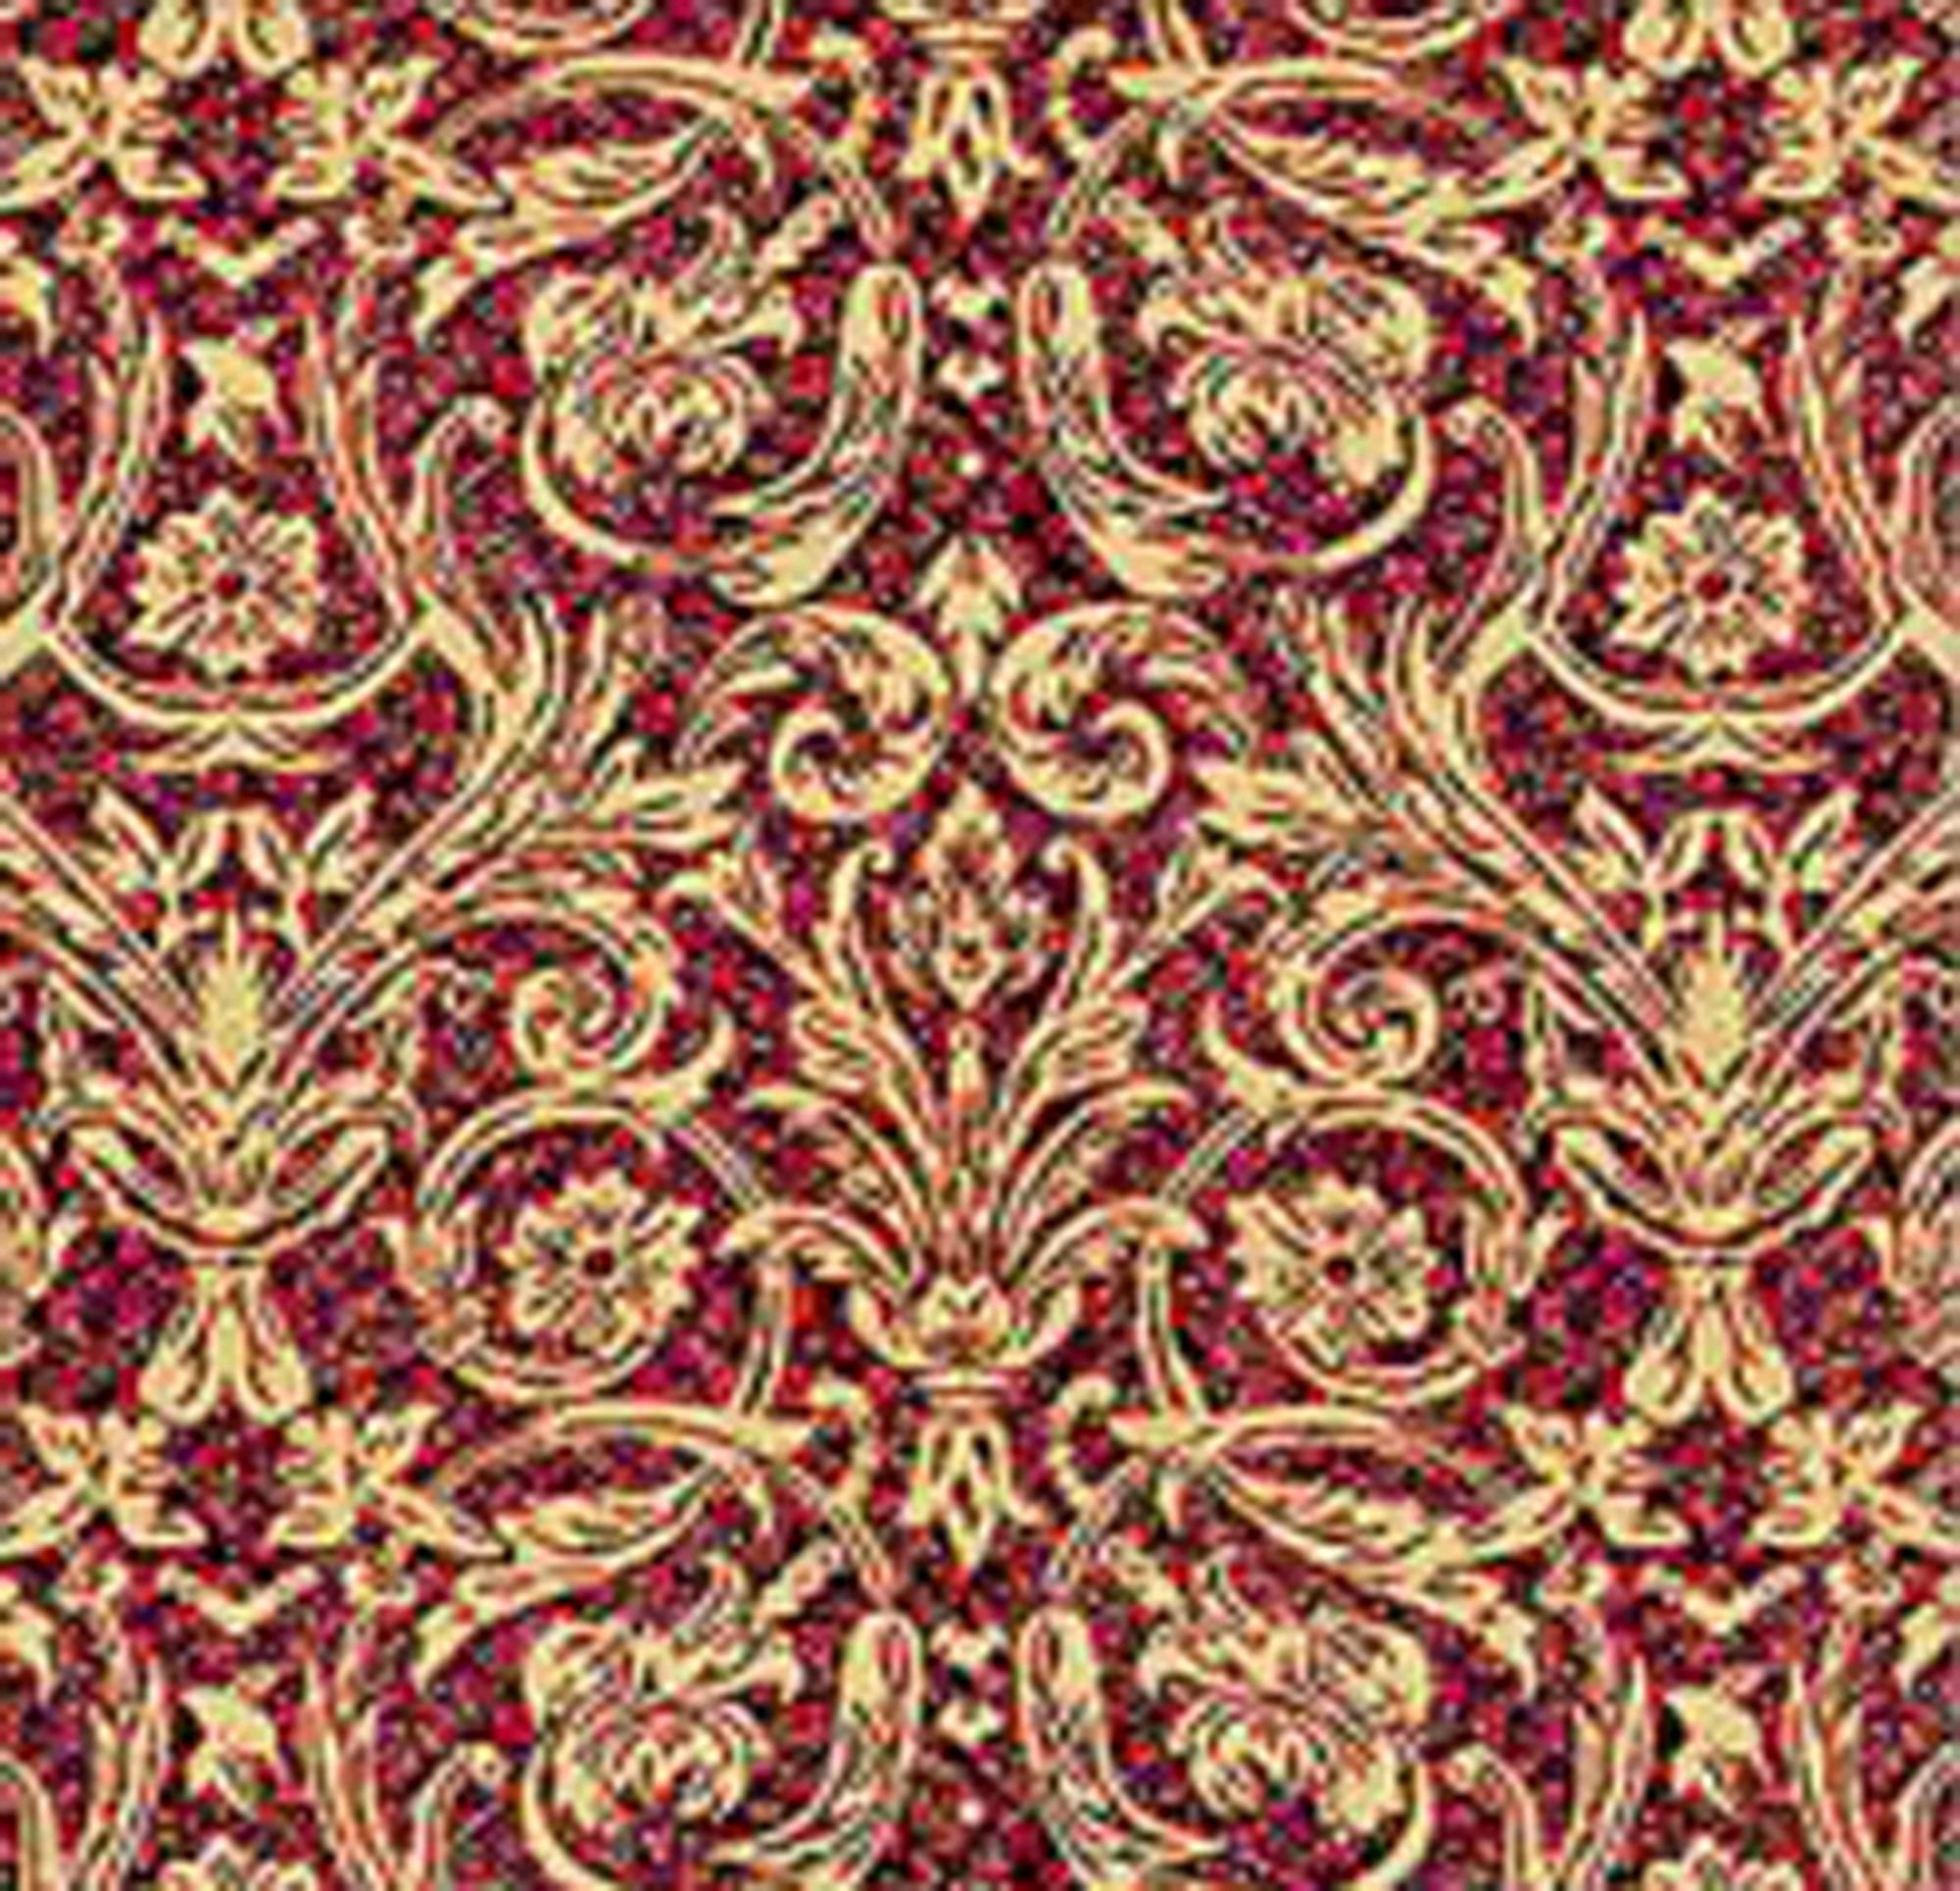 Festive Damask Gold on Red  1:12 Scale Dollhouse Miniature Wallpaper 